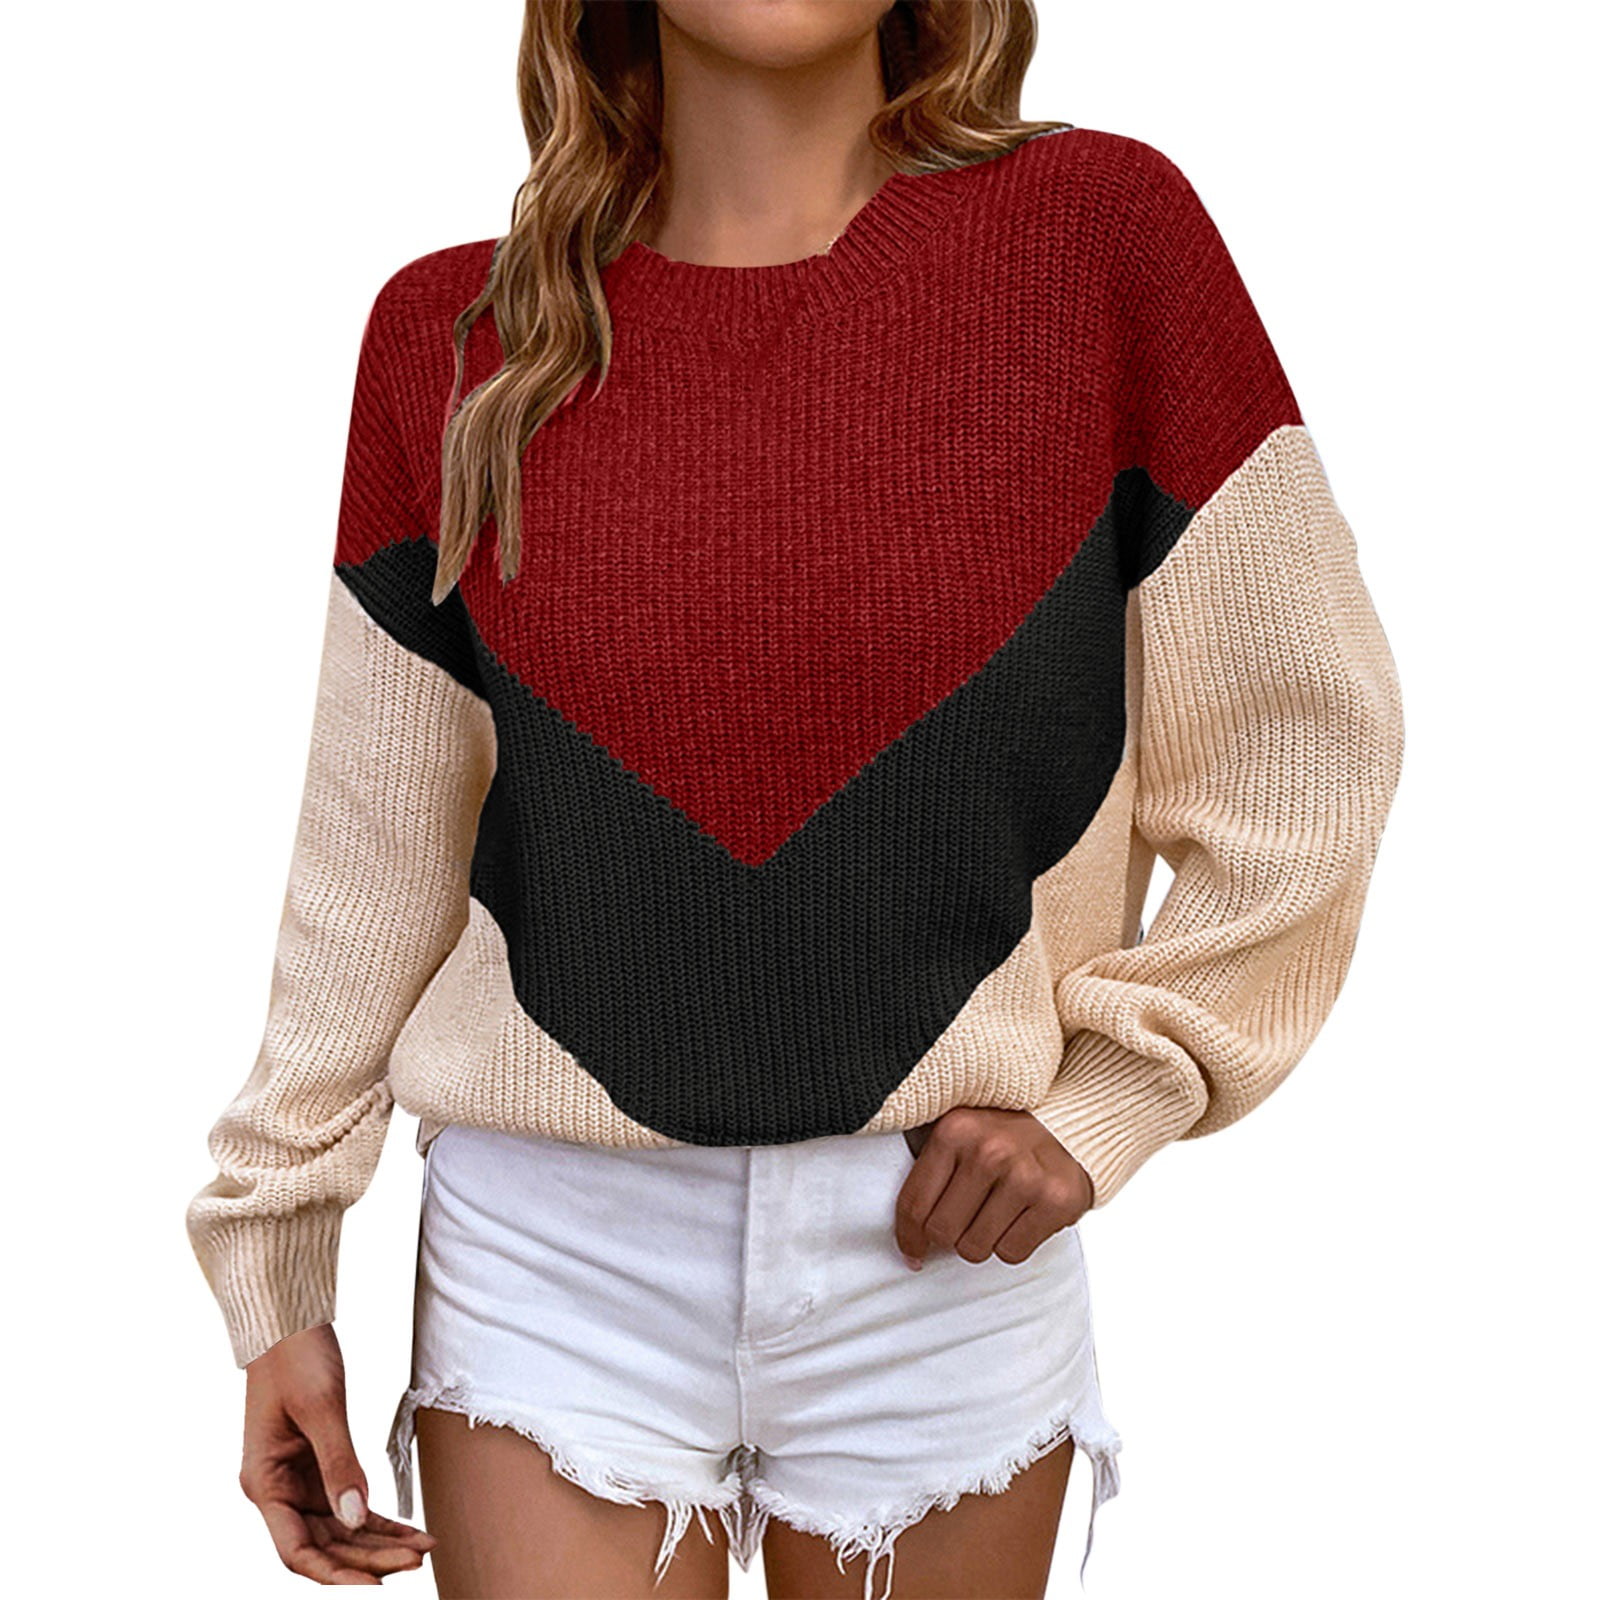 uhnmki Womens Round Neck Long Sleeve Sweater Pullover Top Fashion